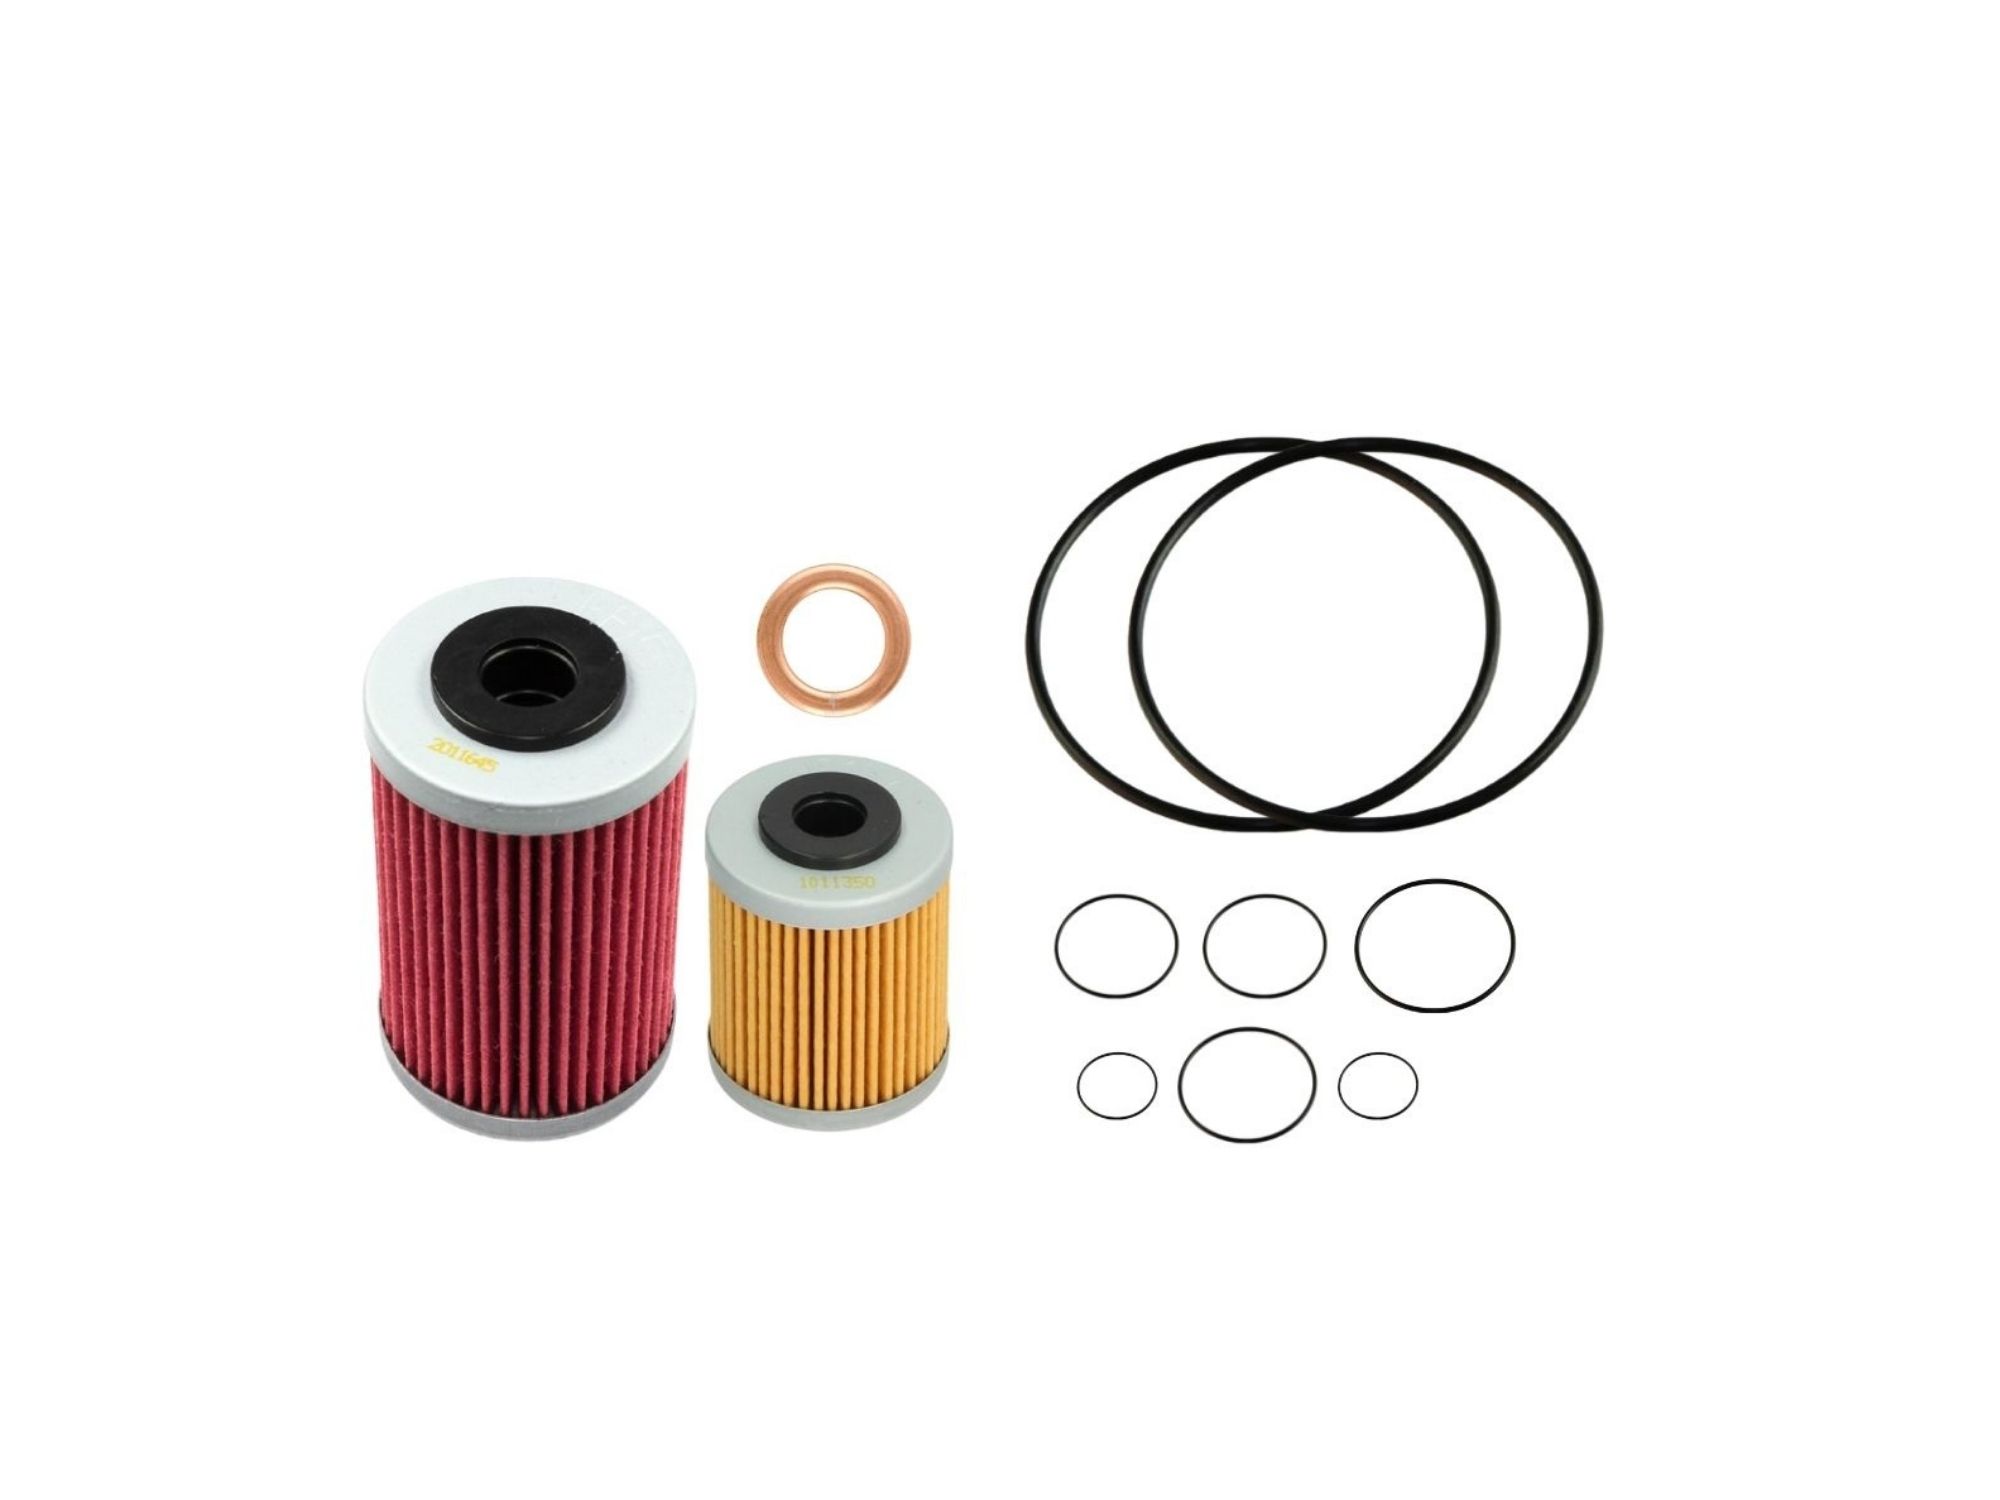 Oil filter kit suitable for KTM EXC Racing 250 400 450 520 525 00-07